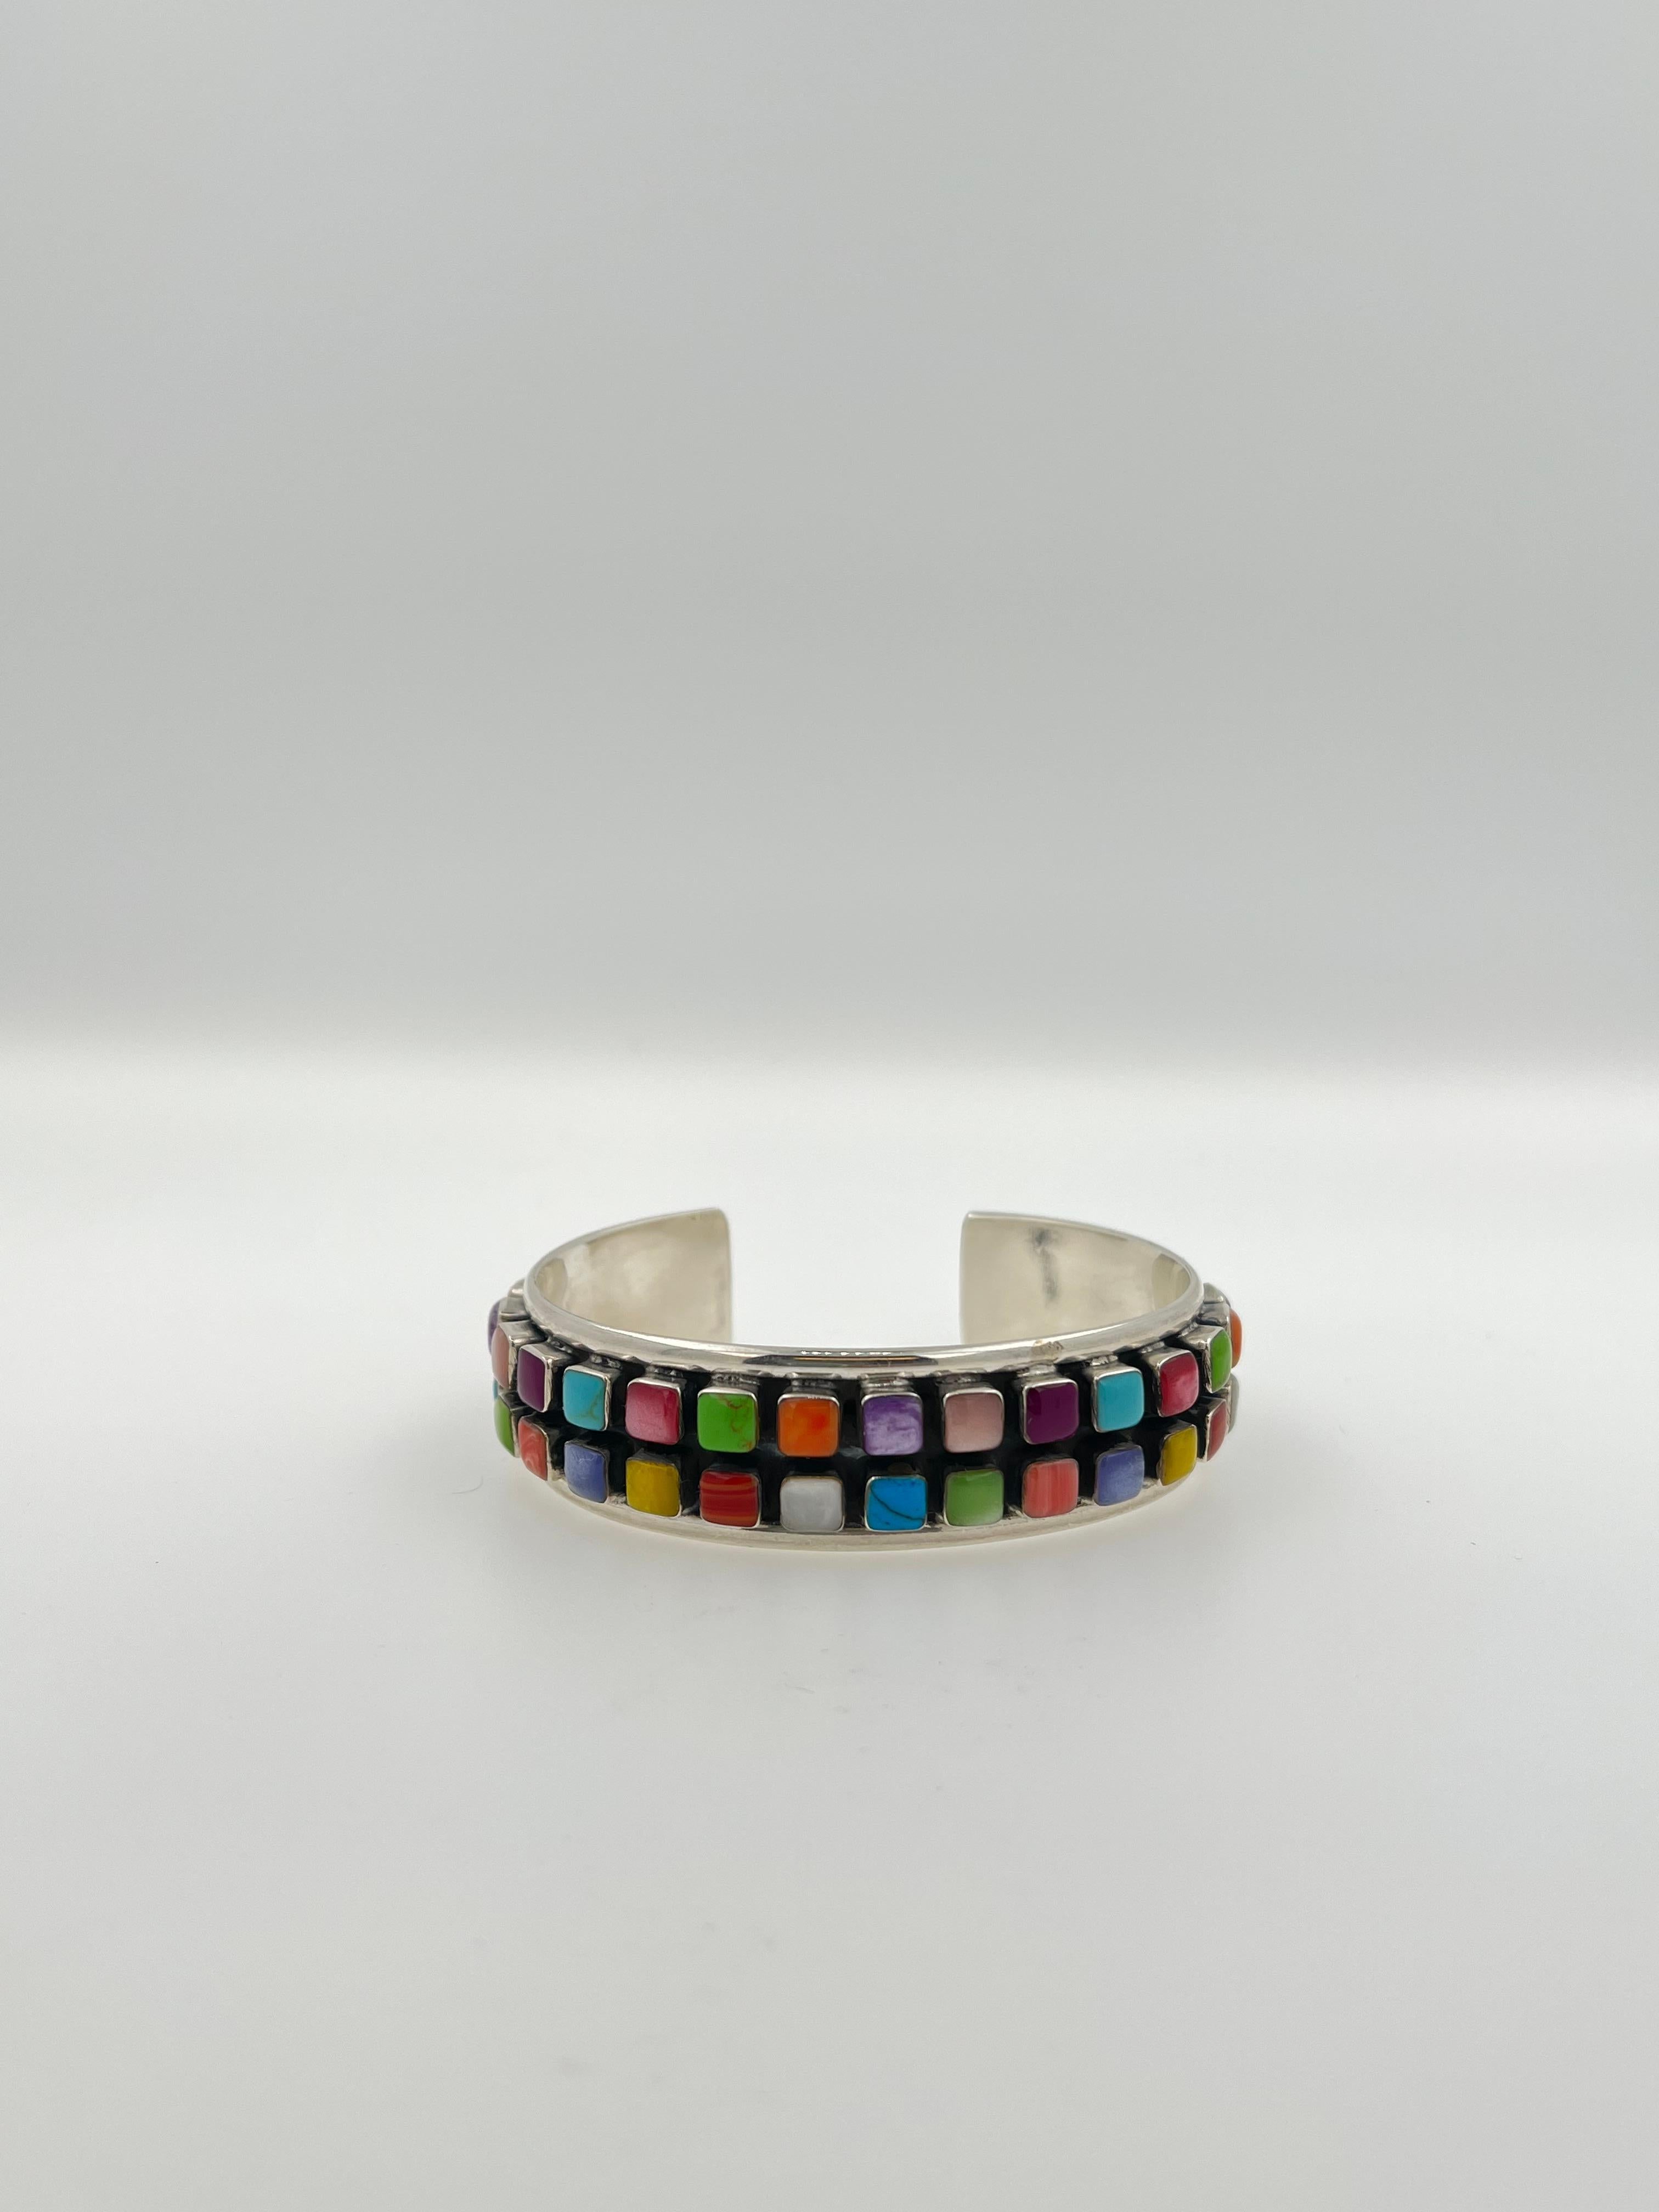 Geometric Colored Rainbow Cab Gemstone Sterling Silver Wide Cuff Bangle Bracelet For Sale 8